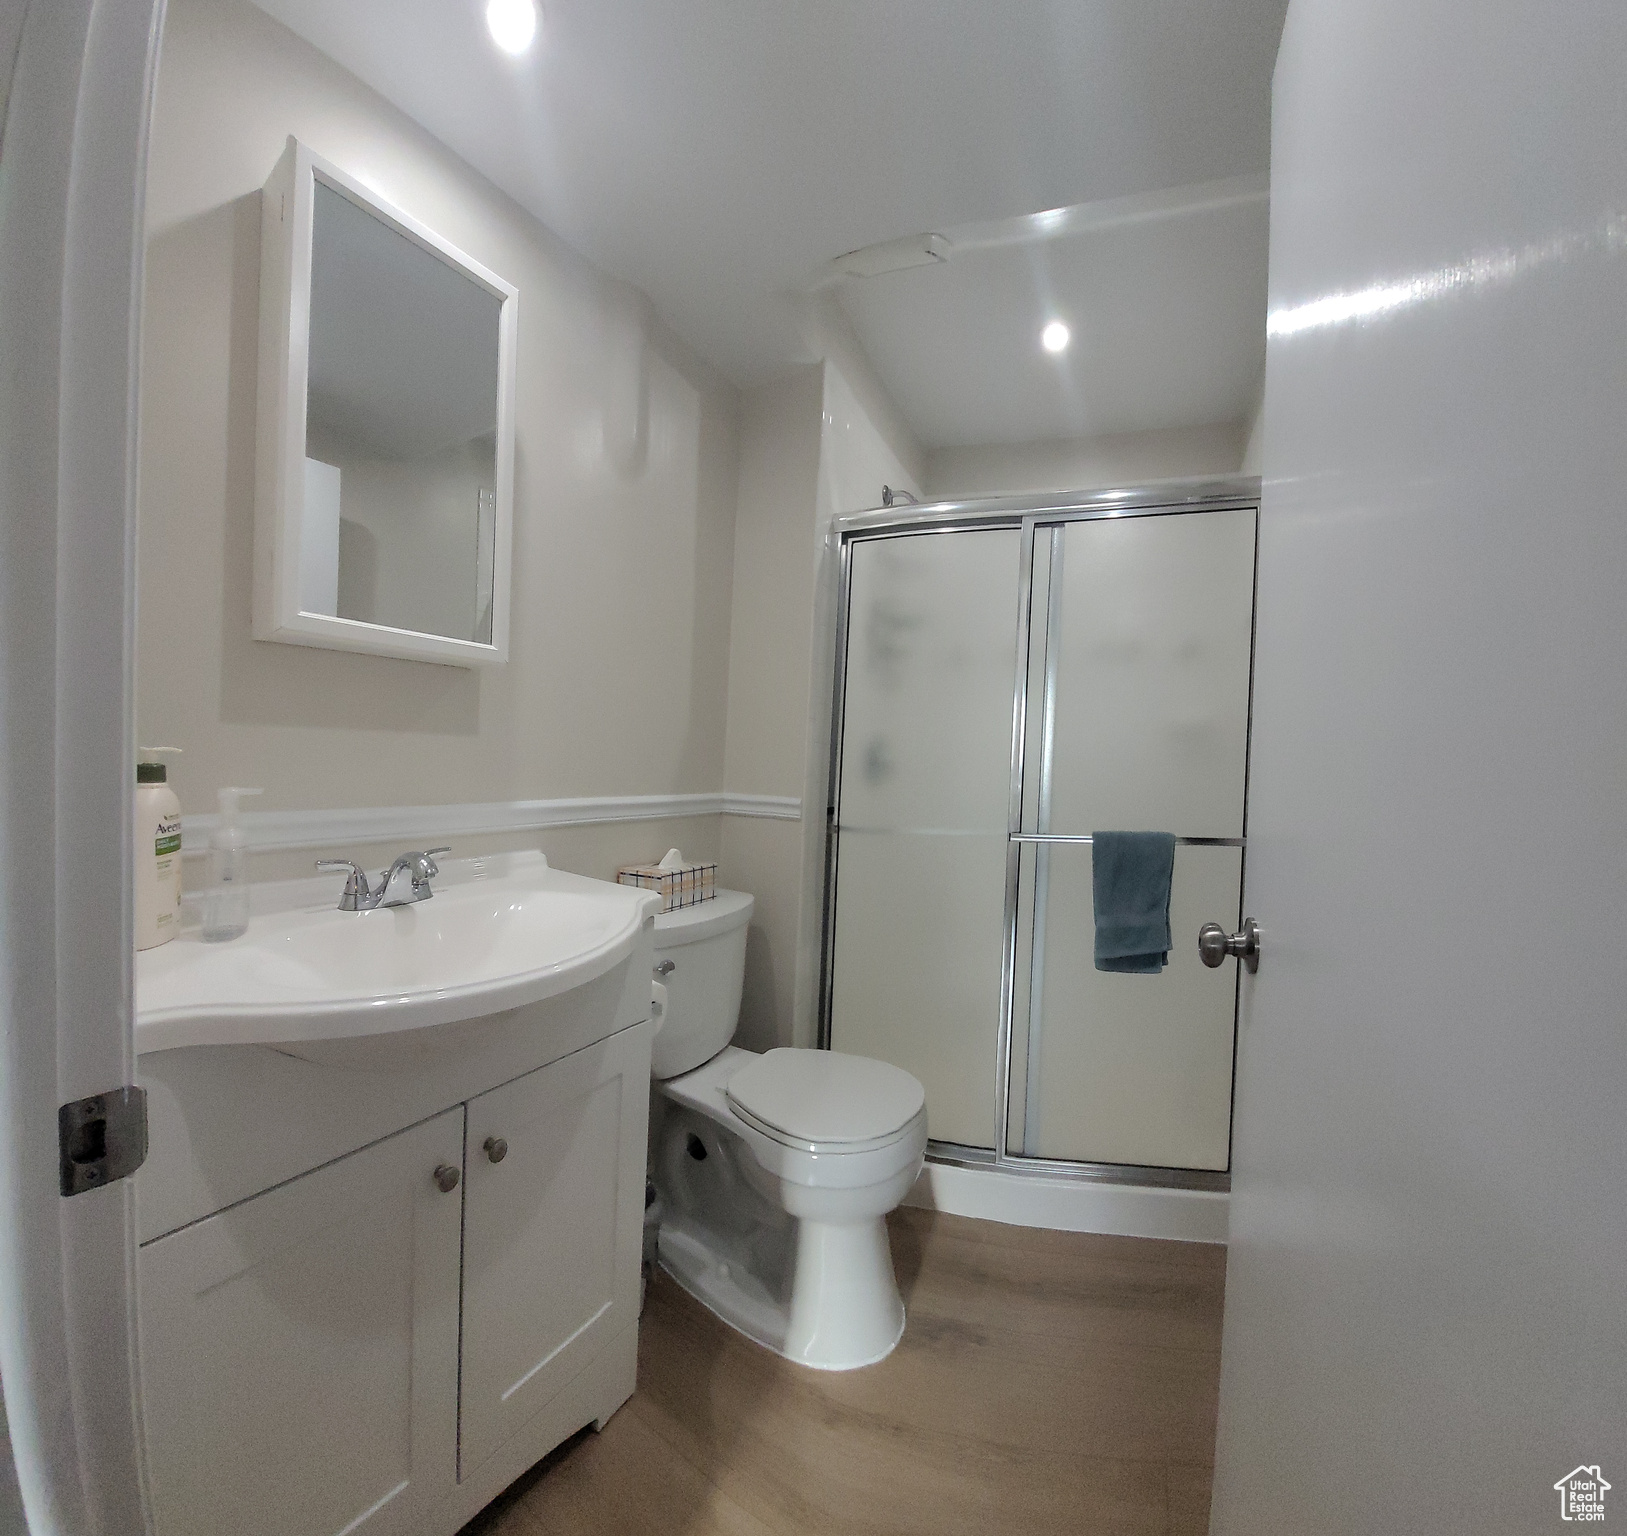 3rd Bathroom with toilet, wood-type flooring, a shower with shower door, and vanity